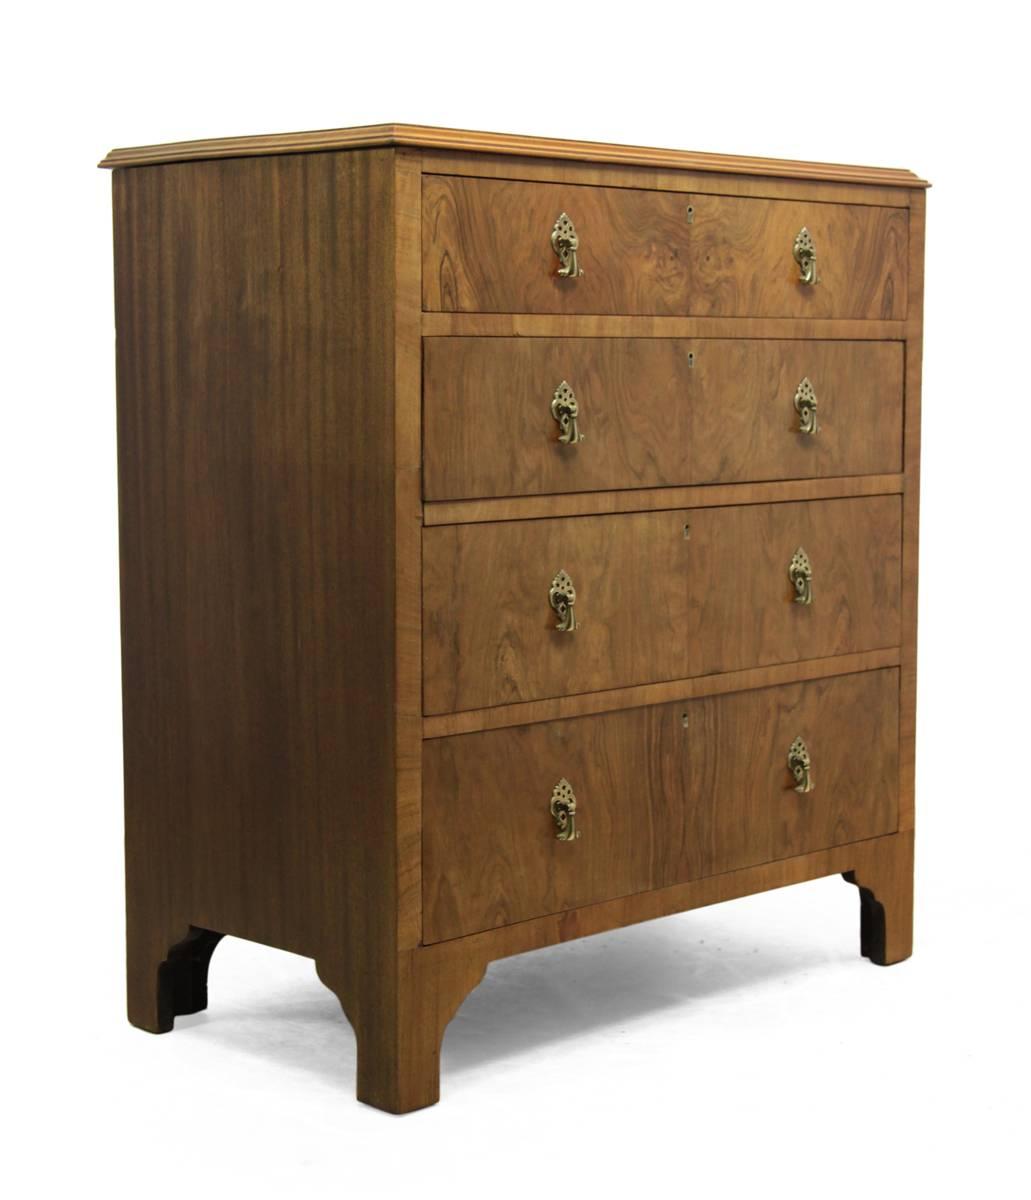 Art Deco walnut chest of drawers, circa 1930.
A good quality walnut chest of drawers from the Art Deco period, with four graduating drawers brass drop handles hand-cut dovetail joints and brass drop handles this chest is in very good vintage